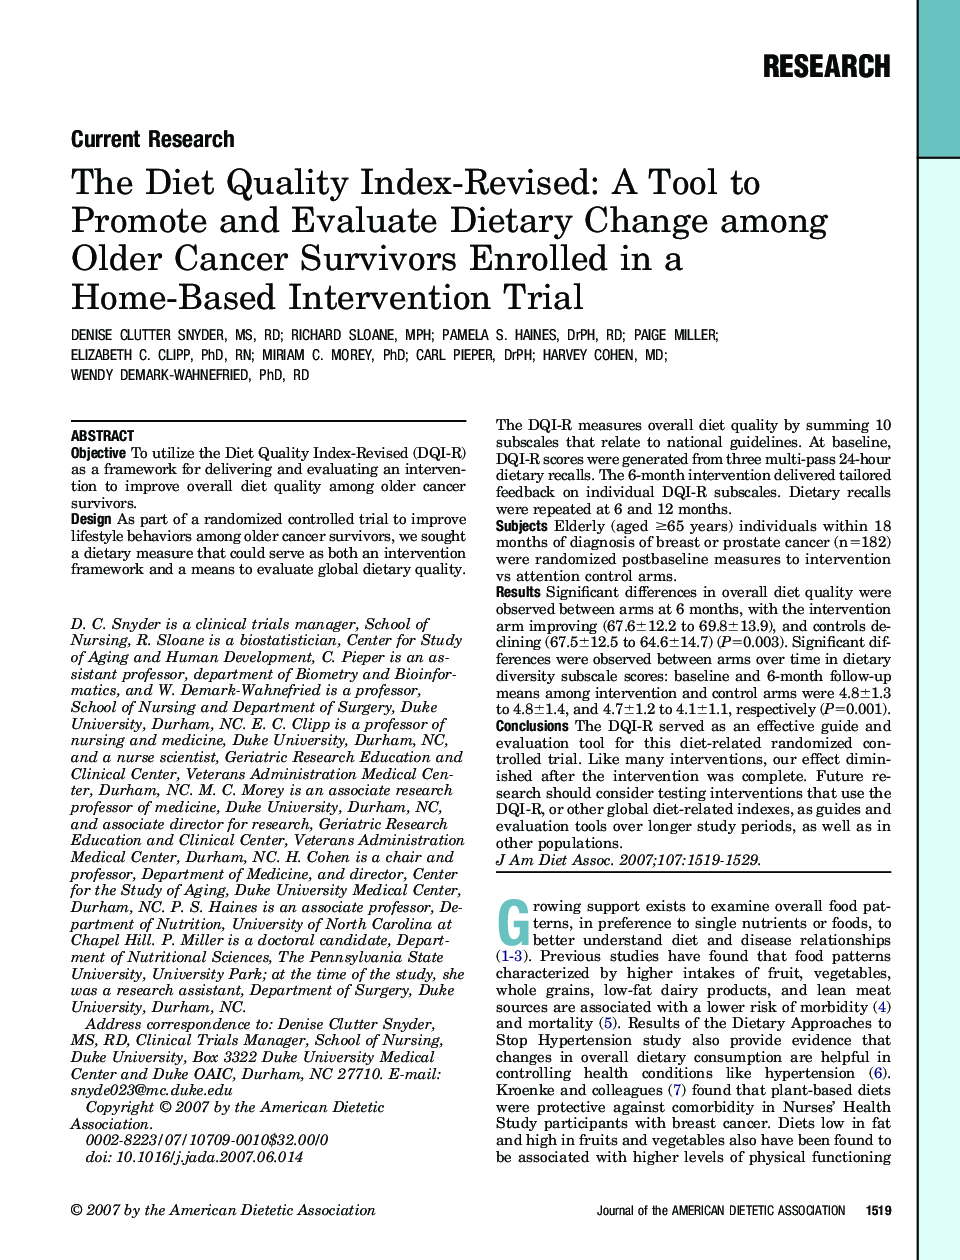 The Diet Quality Index-Revised: A Tool to Promote and Evaluate Dietary Change among Older Cancer Survivors Enrolled in a Home-Based Intervention Trial